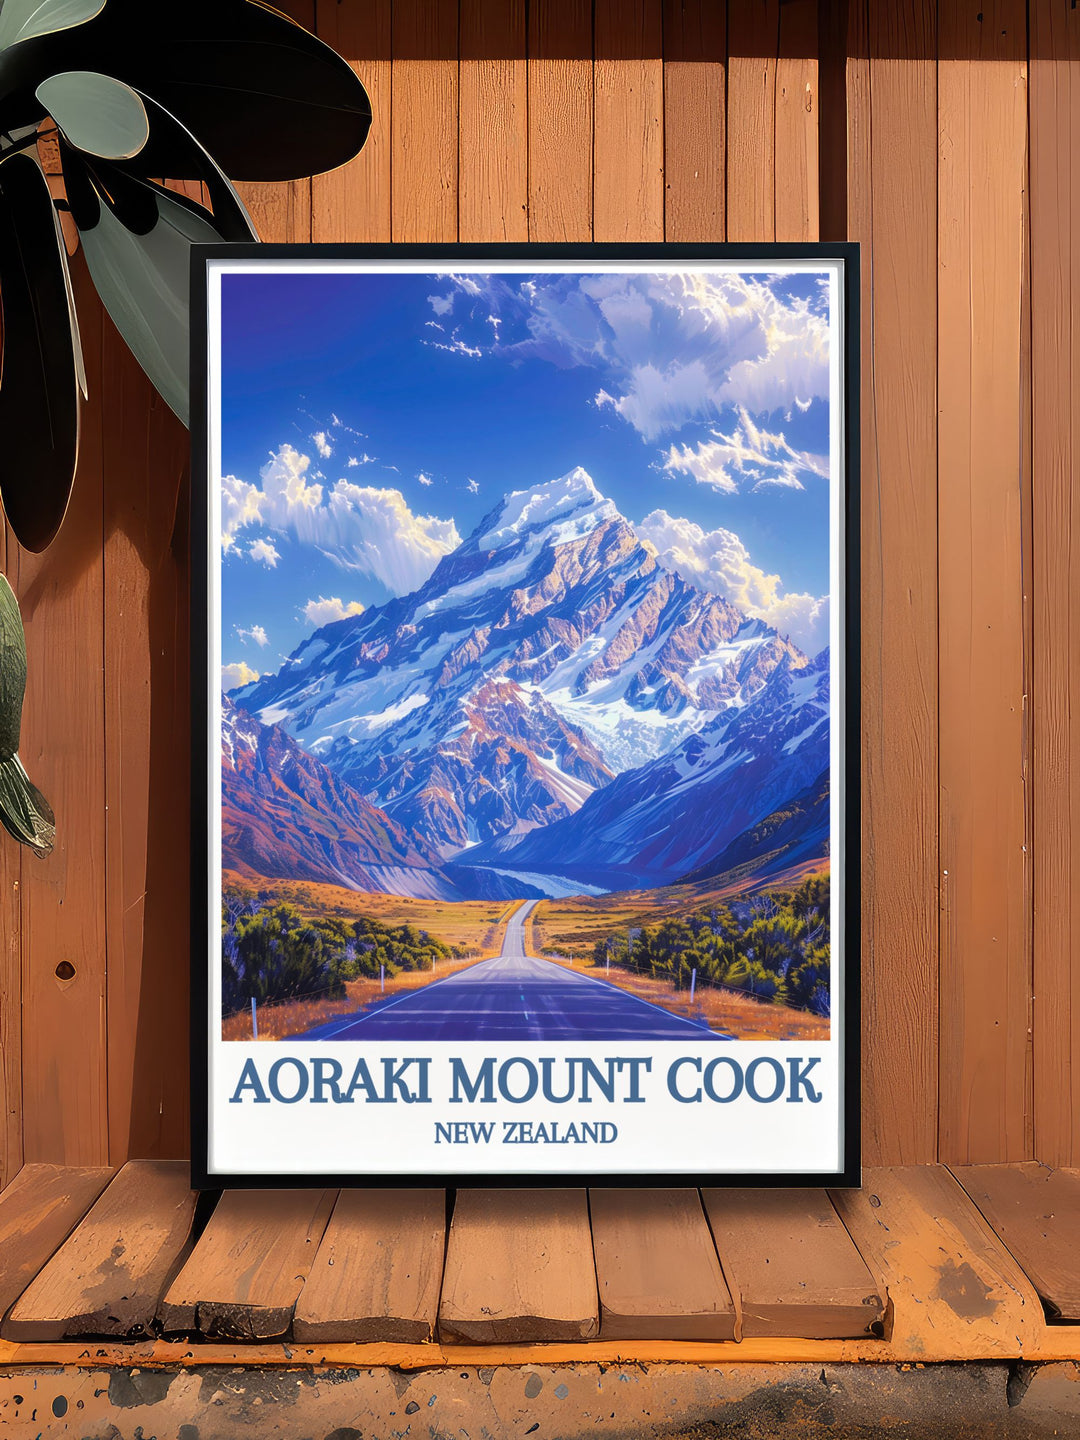 Detailed print of Aoraki Mount Cook during sunset, highlighting the changing colors and dramatic landscape.